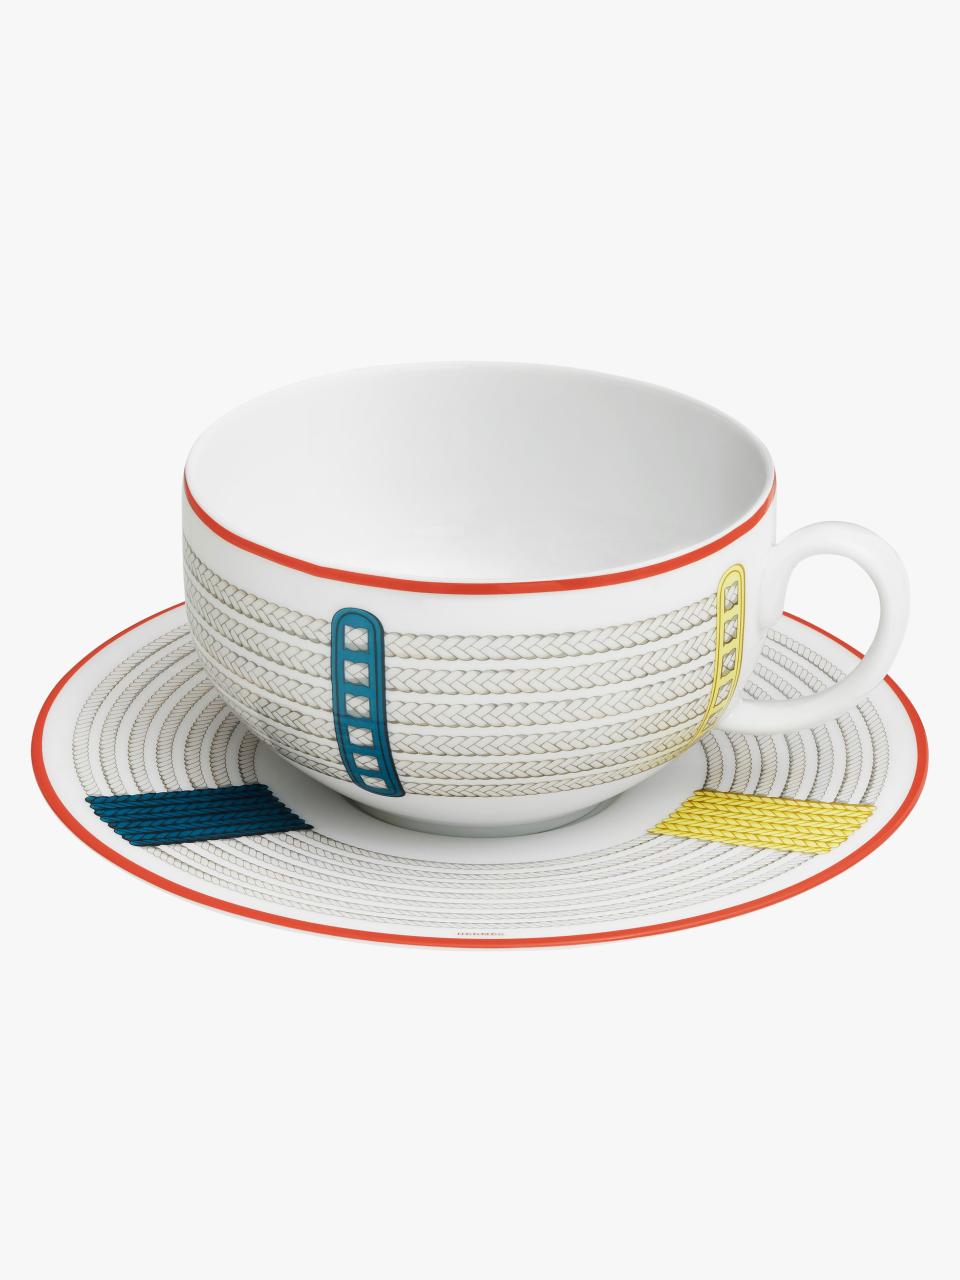 Breakfast cup and saucer, from the Tressages Équestres Collection.